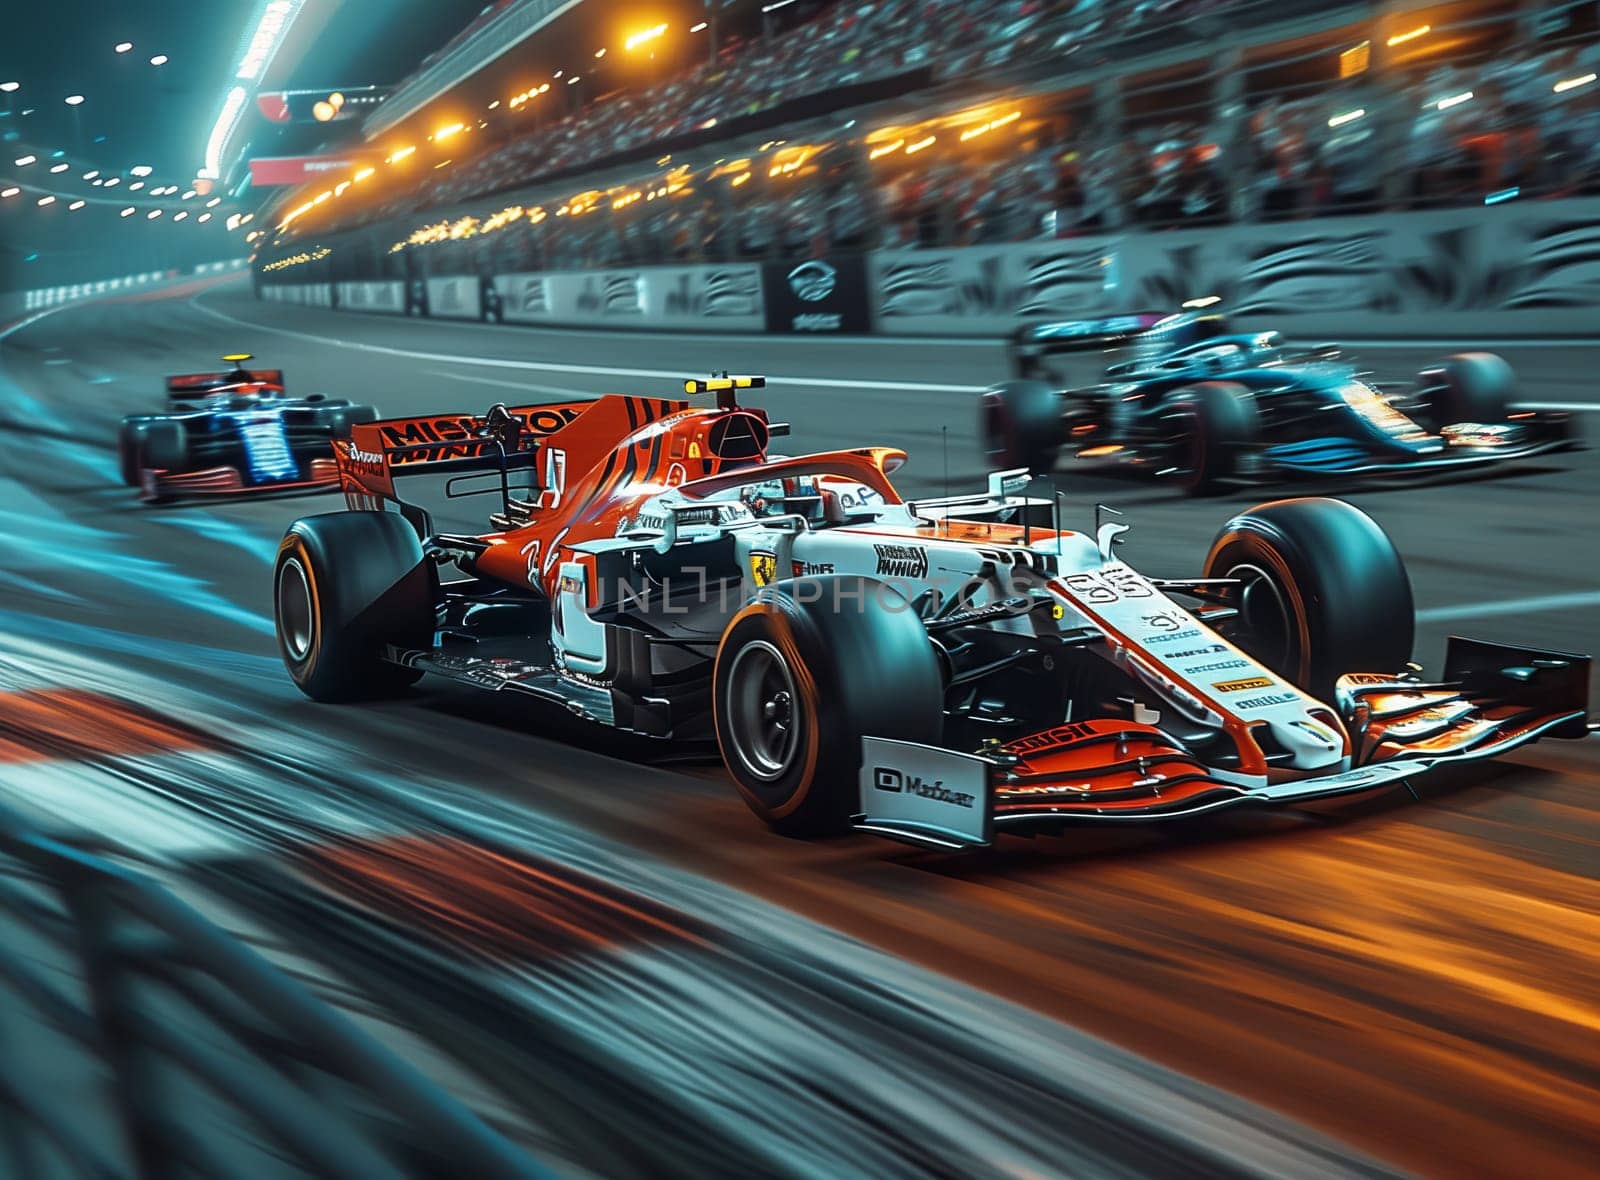 A group of race cars with slick tires are speeding around a race track at night, showcasing the sleek automotive design and adrenalinefueled racing of motorsport